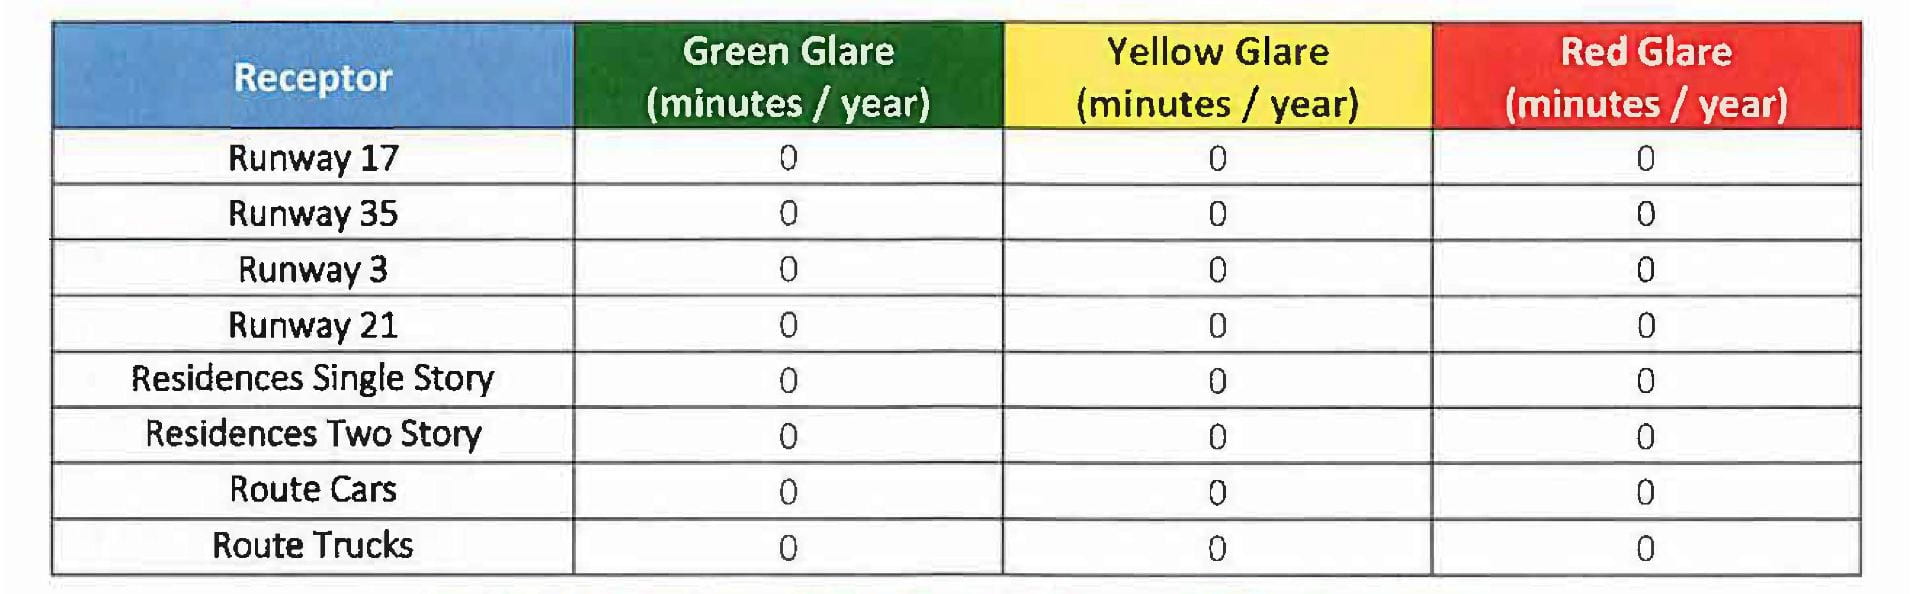 A sample of a final results table for a glint and glare study conducted for a proposed GSSD facility in Pennsylvania. The results of this analysis predicted no glare for any receptor.